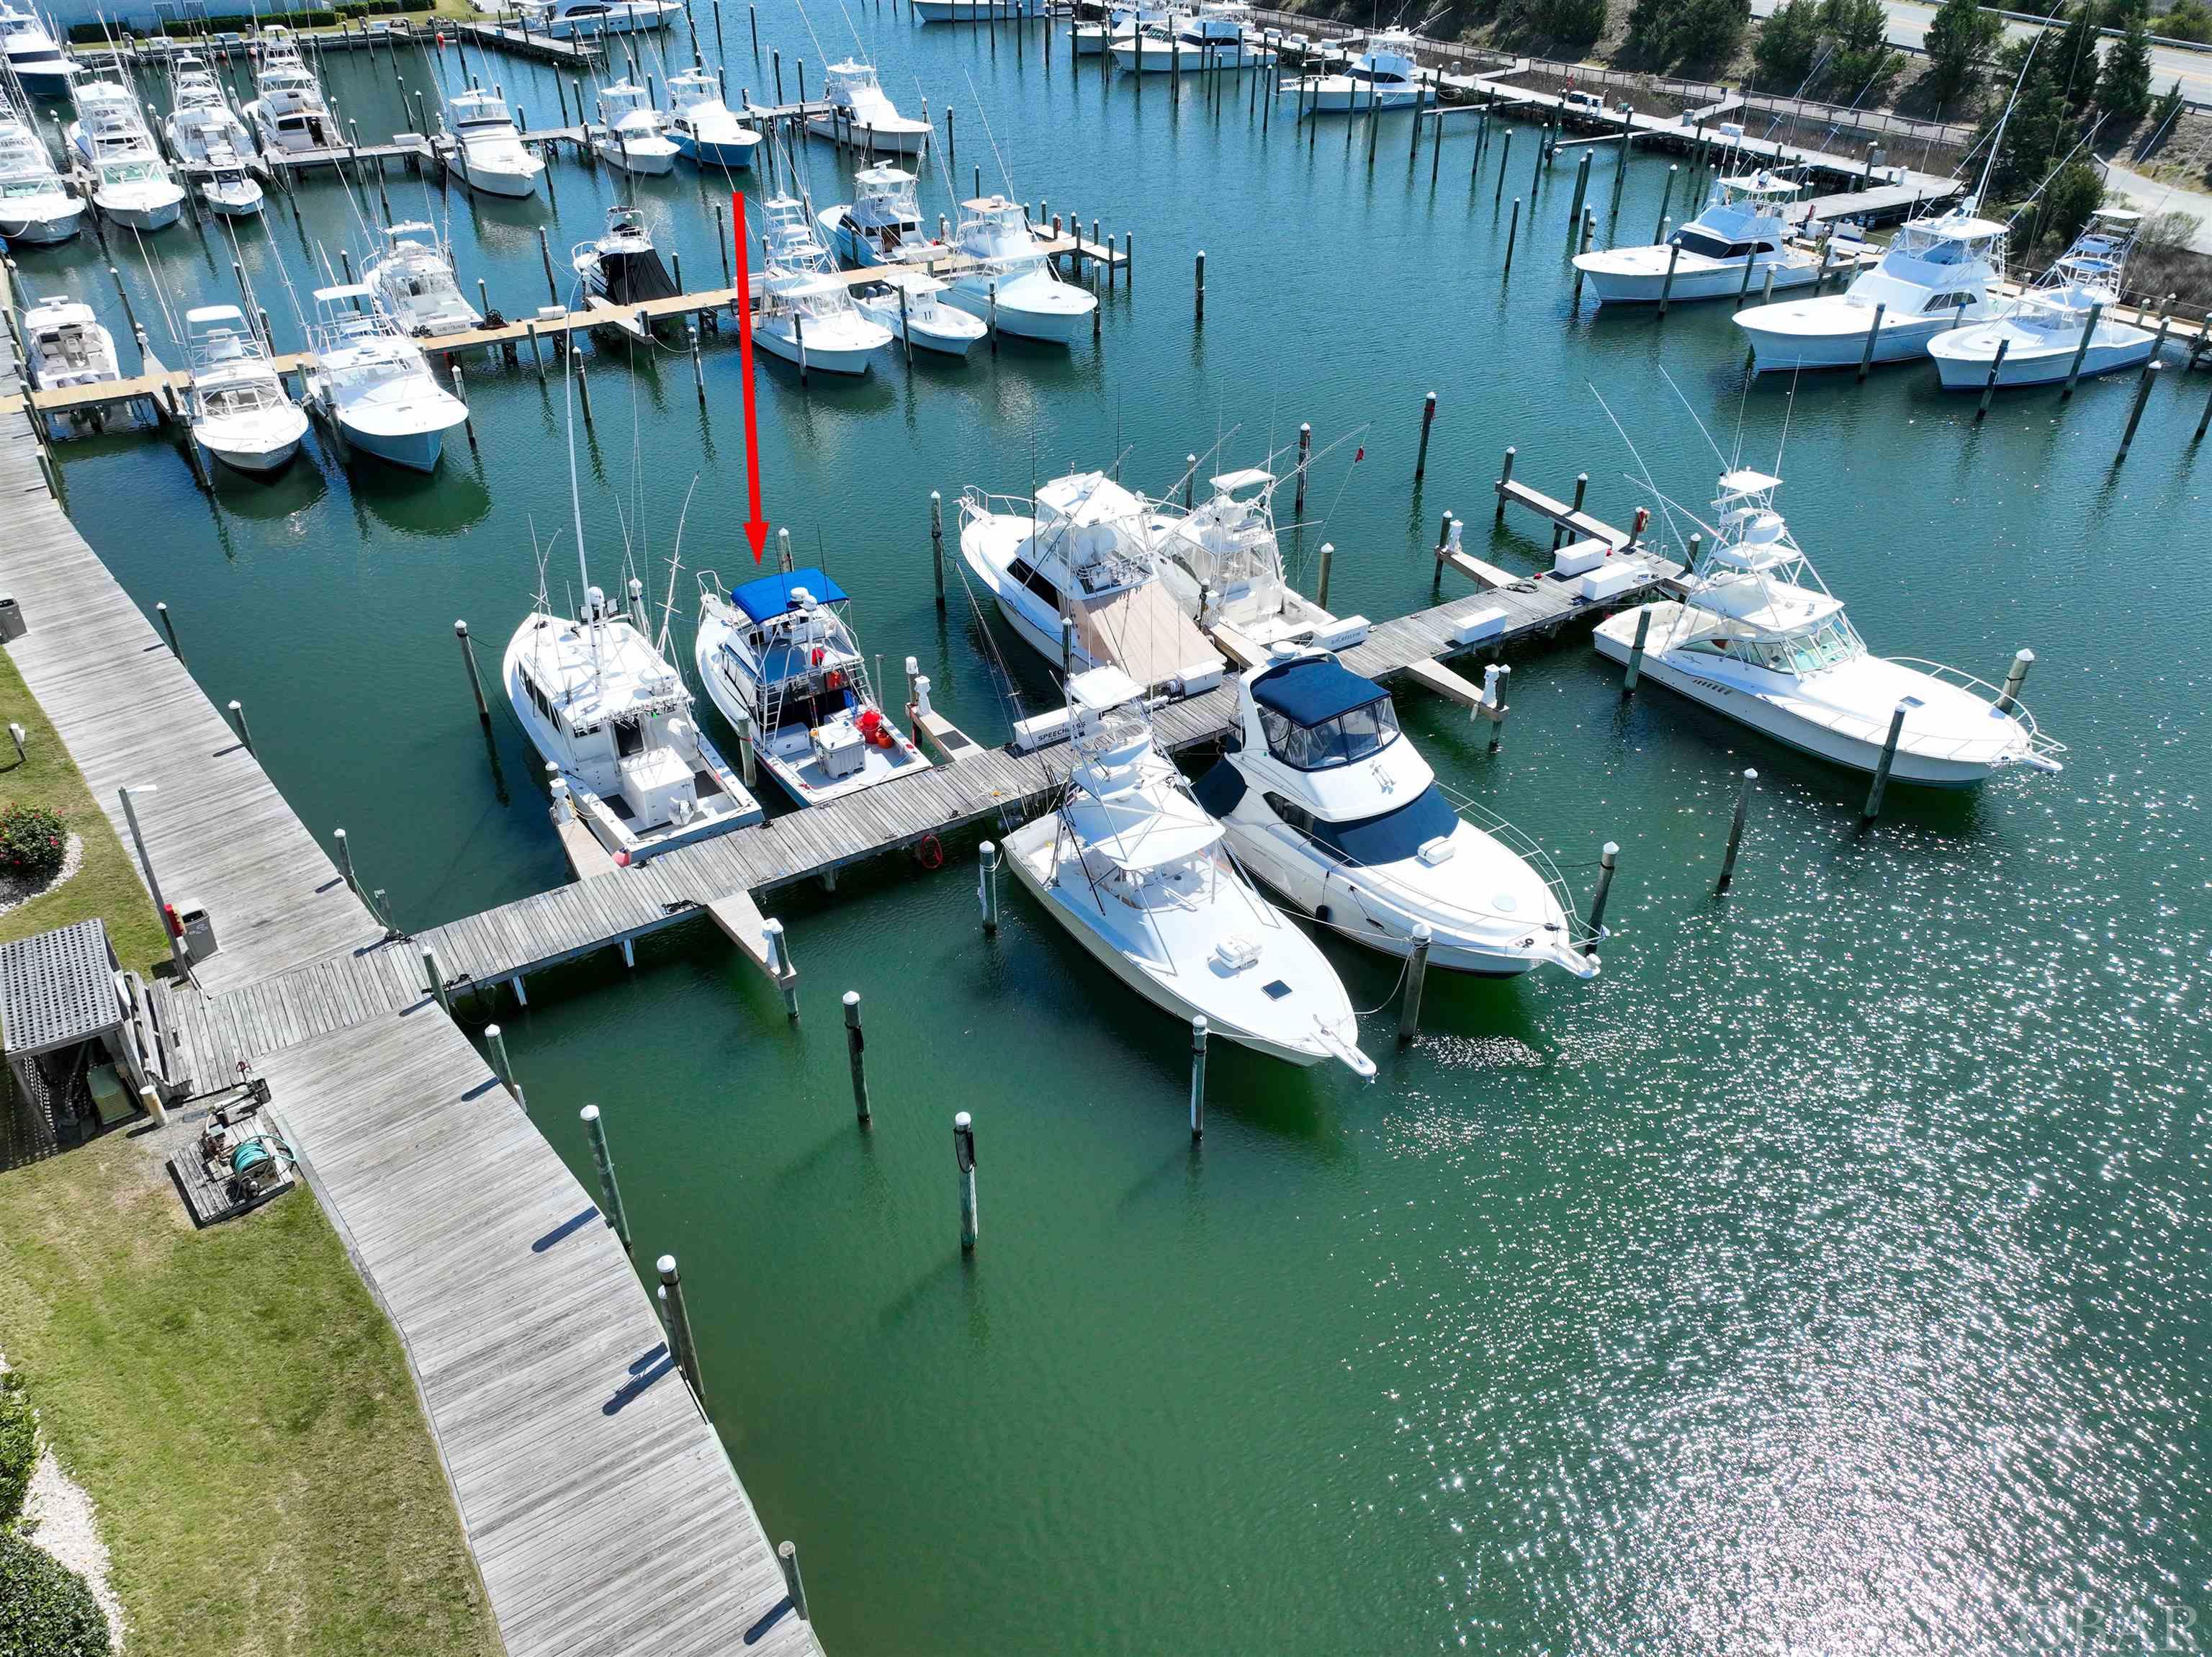 Welcome to Pirates Cove Marina in the charming coastal town of Manteo, NC! We're excited to offer a fantastic opportunity for boaters to own their very own slip in this premier marina. This particular slip is located in a prime position with easy access to the Atlantic Ocean. It can accommodate vessels up to 50', making it a great option for a range of boat sizes. You can even rent your slip by the night, week or month.    But that's not all - owning a slip at Pirates Cove Marina also gives you access to a wide range of resort-style amenities. Take advantage of the swimming pool, hot tub, and clubhouse, or hit the tennis and basketball courts for some friendly competition. You can even grab a bite to eat at the on-site restaurant and tiki bar.  When you're ready to explore the surrounding area, you'll find no shortage of things to do. Manteo is a quaint town with plenty of shops, restaurants, and cultural attractions to enjoy. And with easy access to the Outer Banks, you'll have miles of beautiful beaches, nature preserves, and historical sites to explore. Don't miss out on this amazing opportunity to own a boat slip at Pirates Cove Marina!